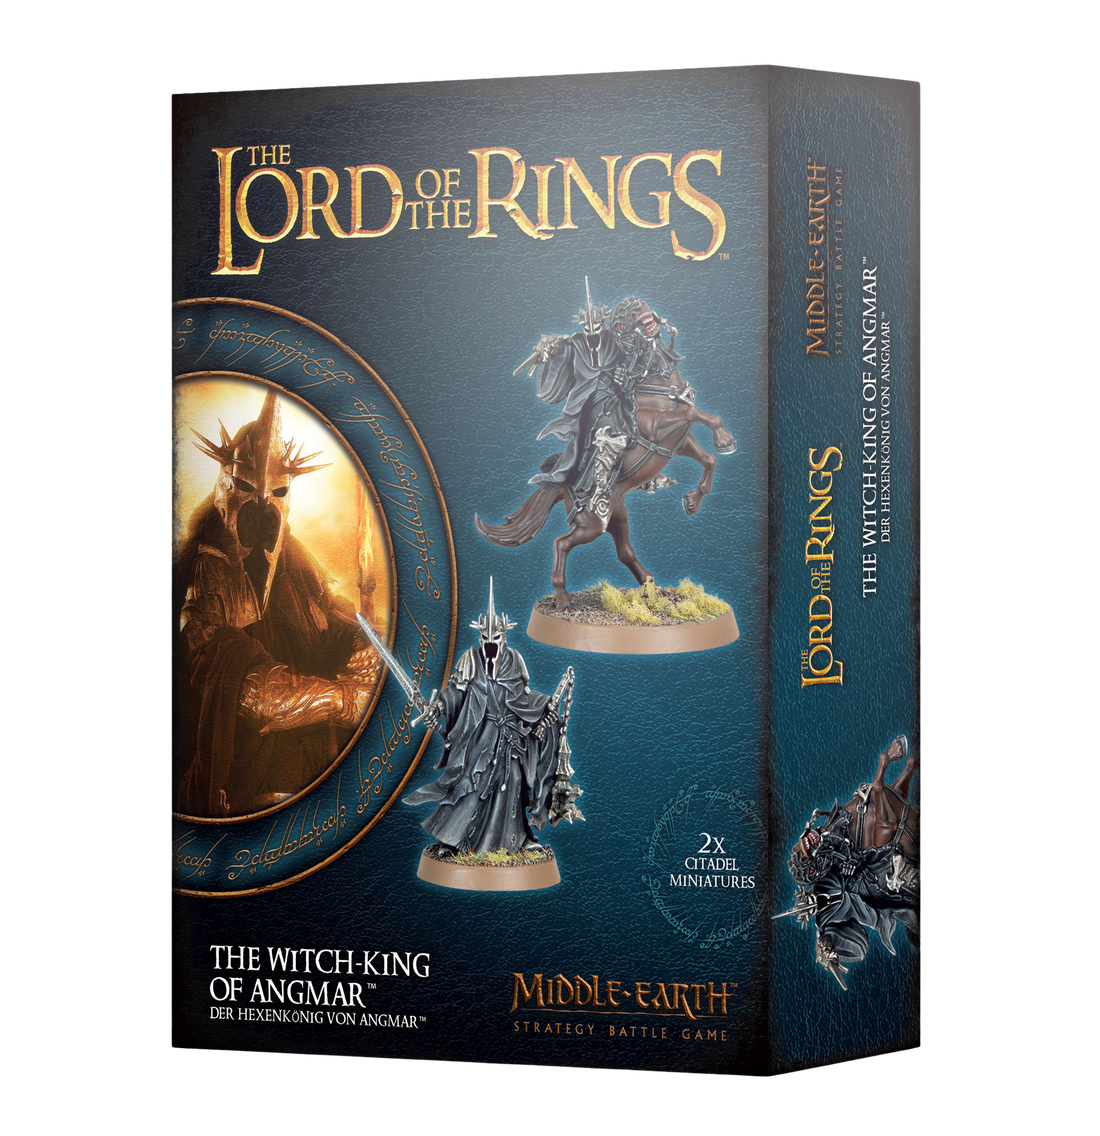 Middle-earth™ Strategy Battle Game - The Witch-king of Angmar™